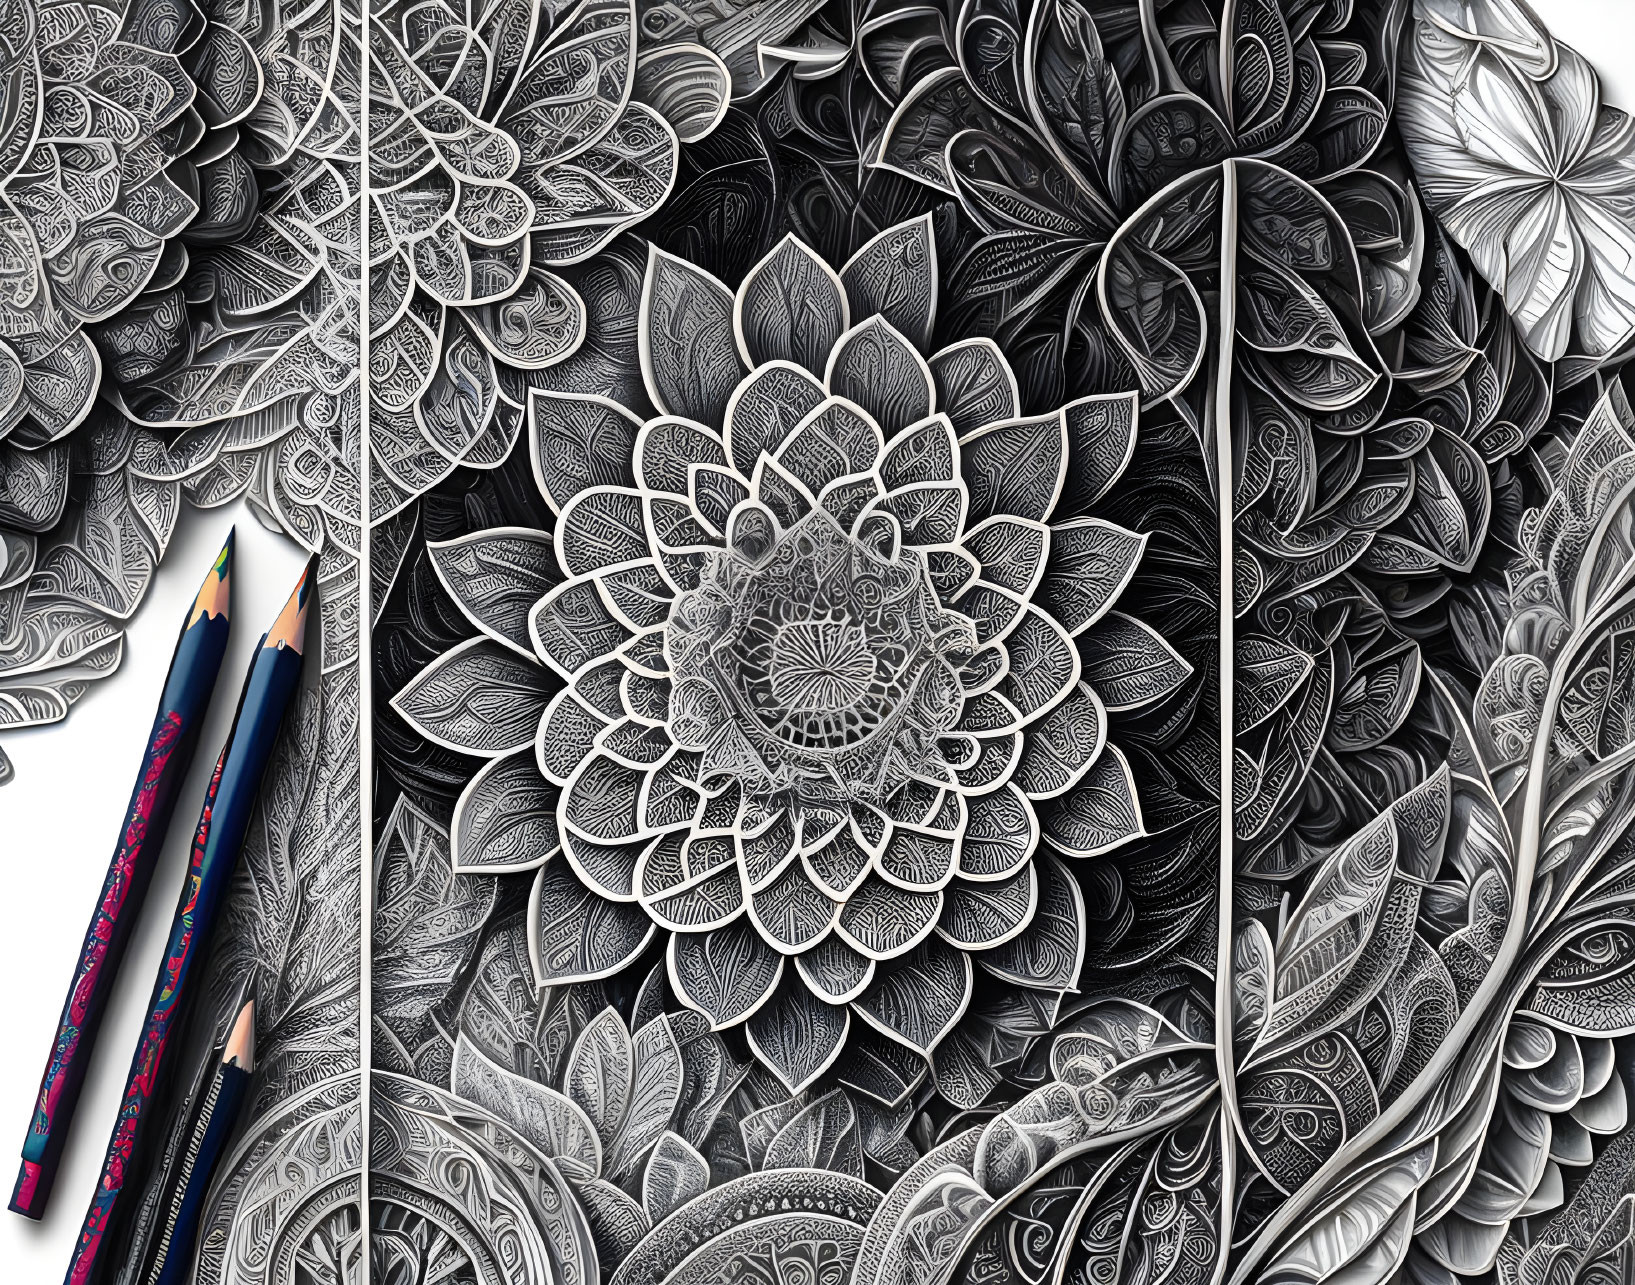 Detailed Black and White Floral Mandala Drawing with Colored Pencils